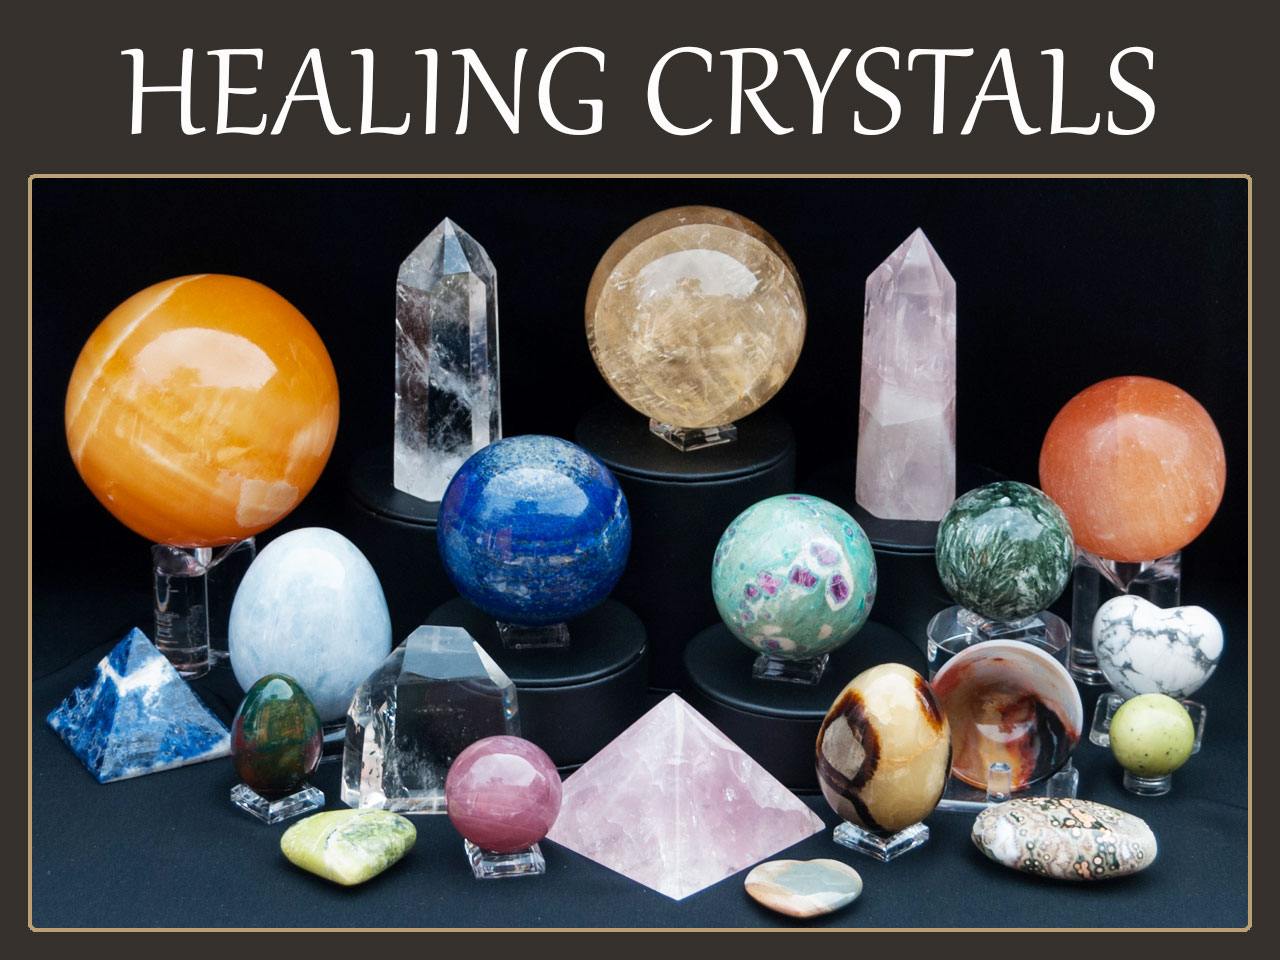 Healing-Crystals-Stones-New-Age-Metaphysical-Store-1280x960.jpg